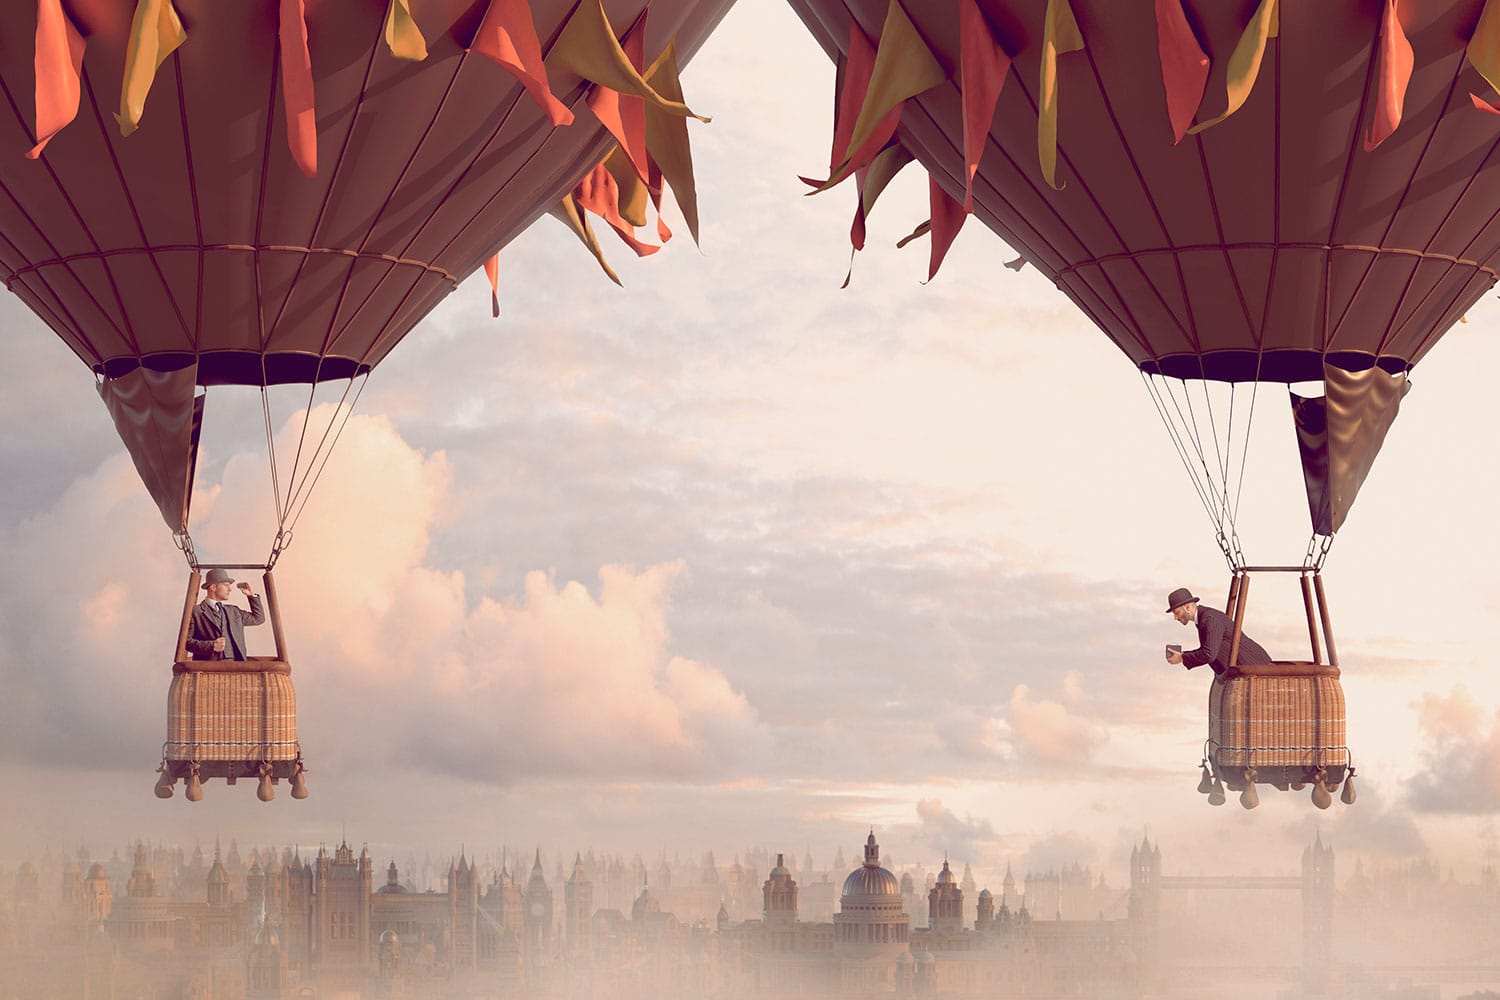 Men in 1930's suit looking at each other from hot air balloons, one using binoculars while the other takes a photo as they float over a bustling city